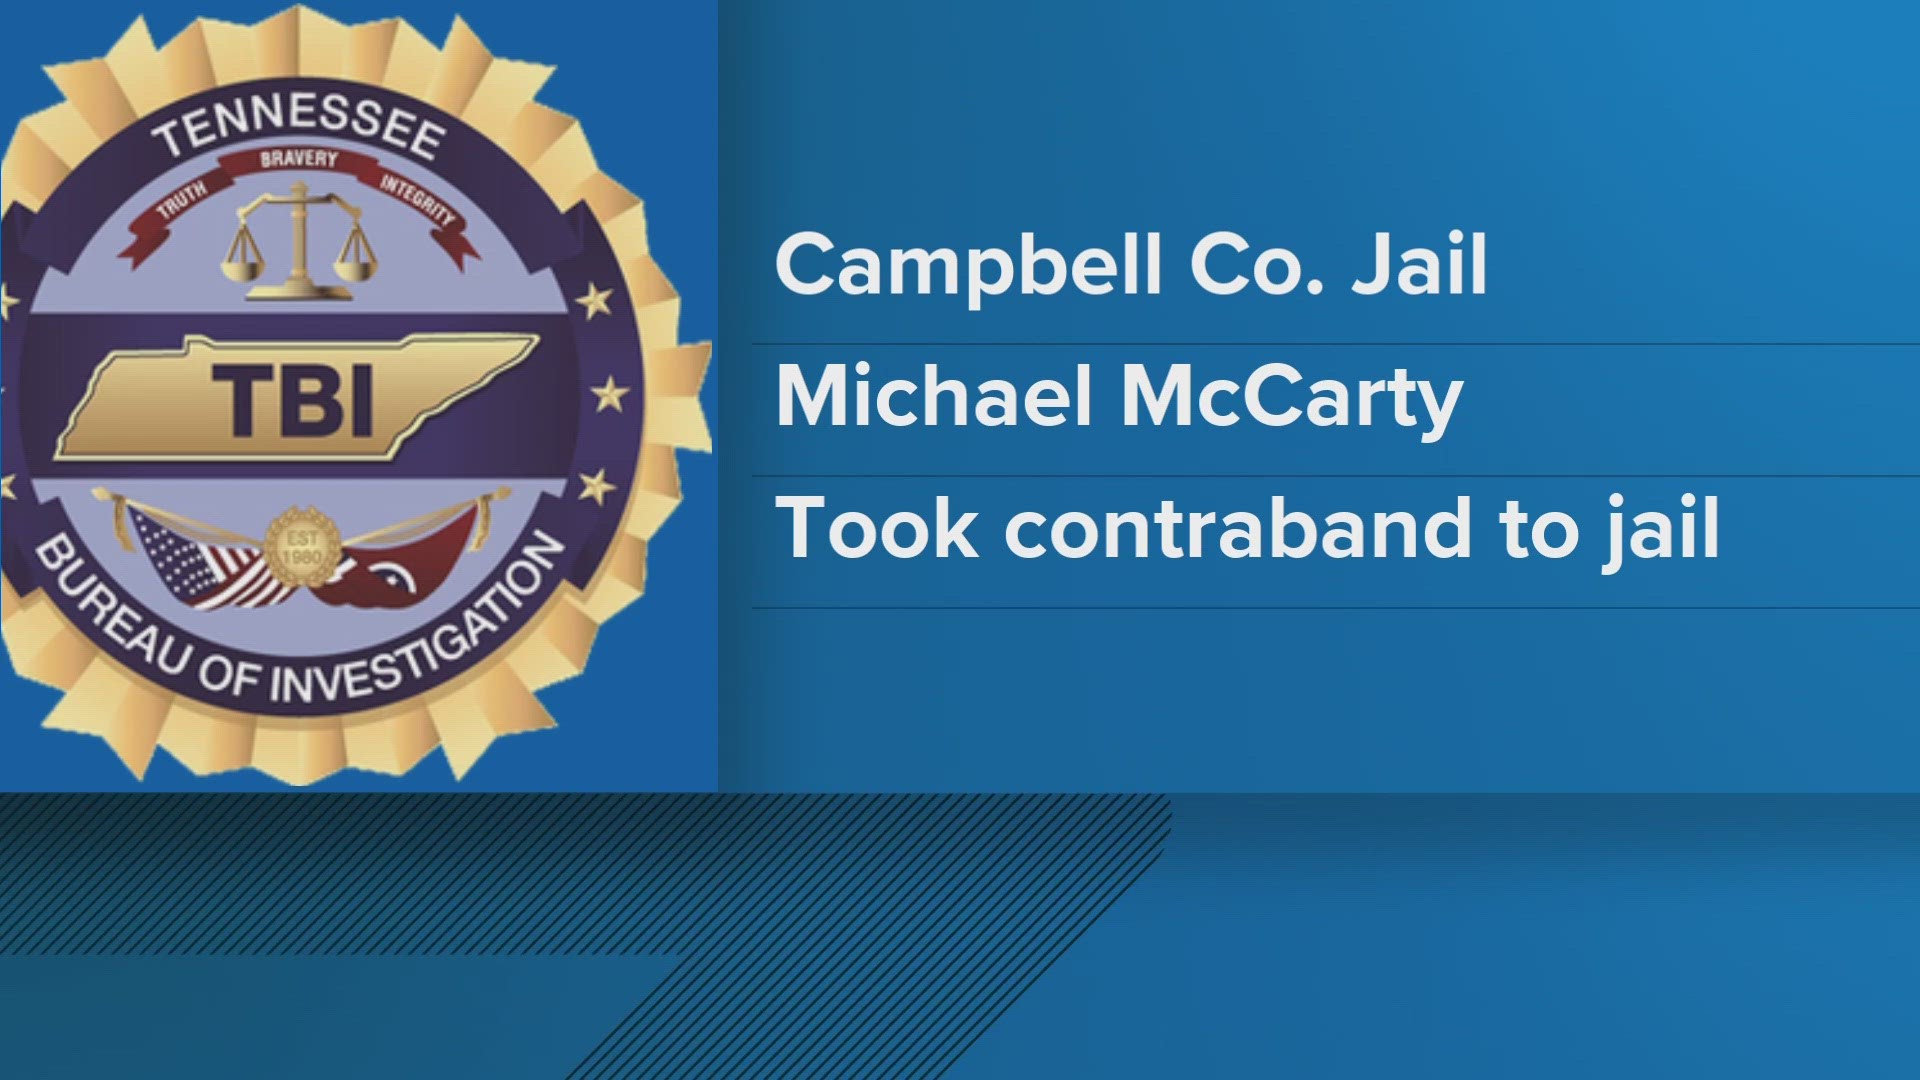 Michael J. McCarty was charged with two counts of official misconduct, according to the Tennessee Bureau of Investigation.